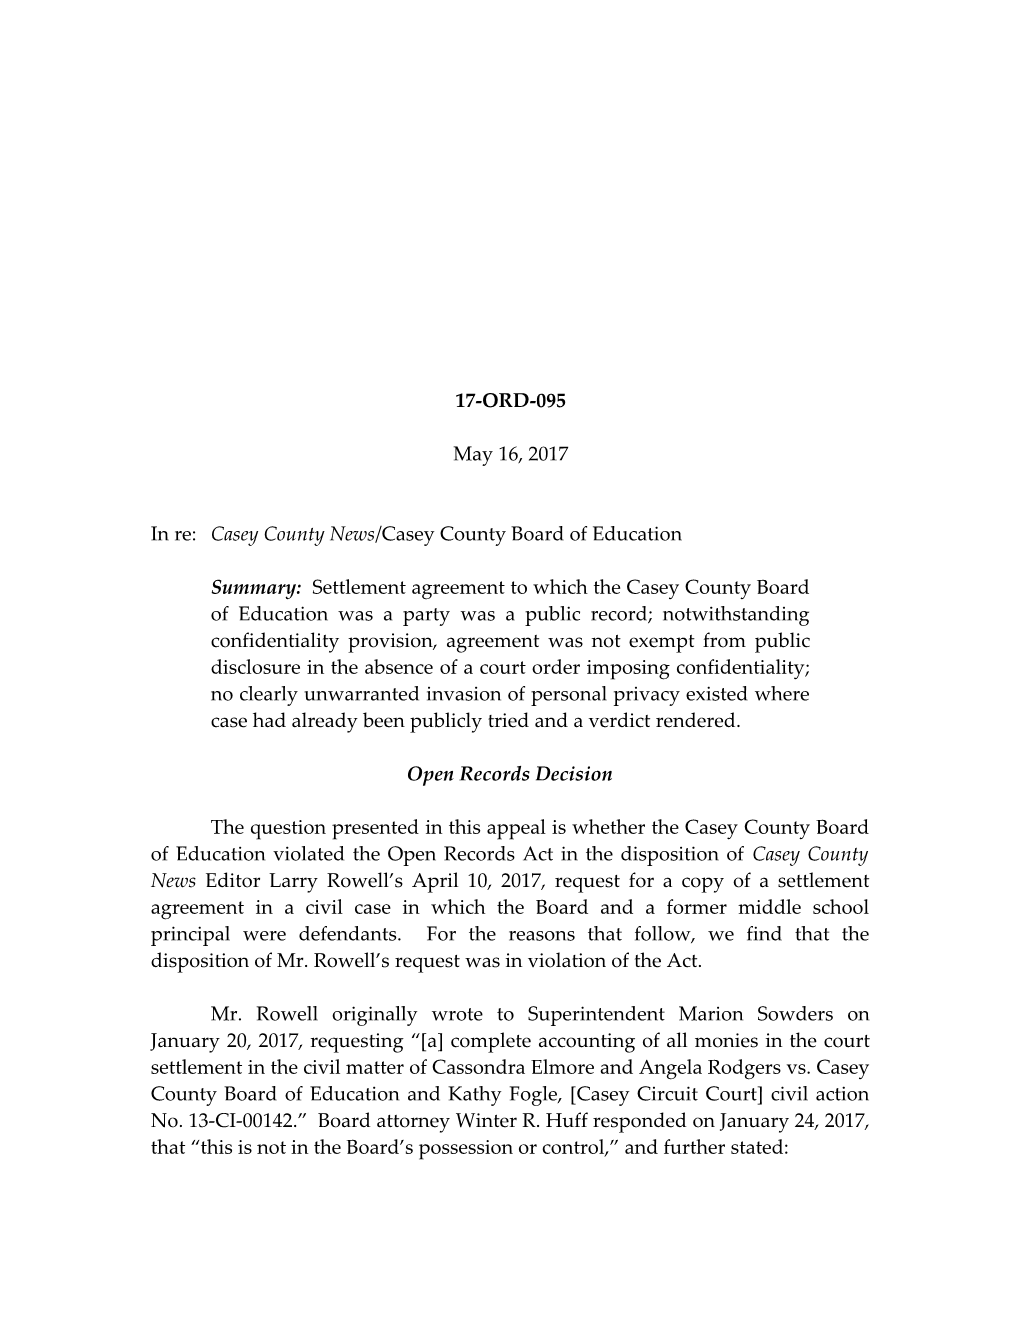 In Re: Casey County News/Casey County Board of Education